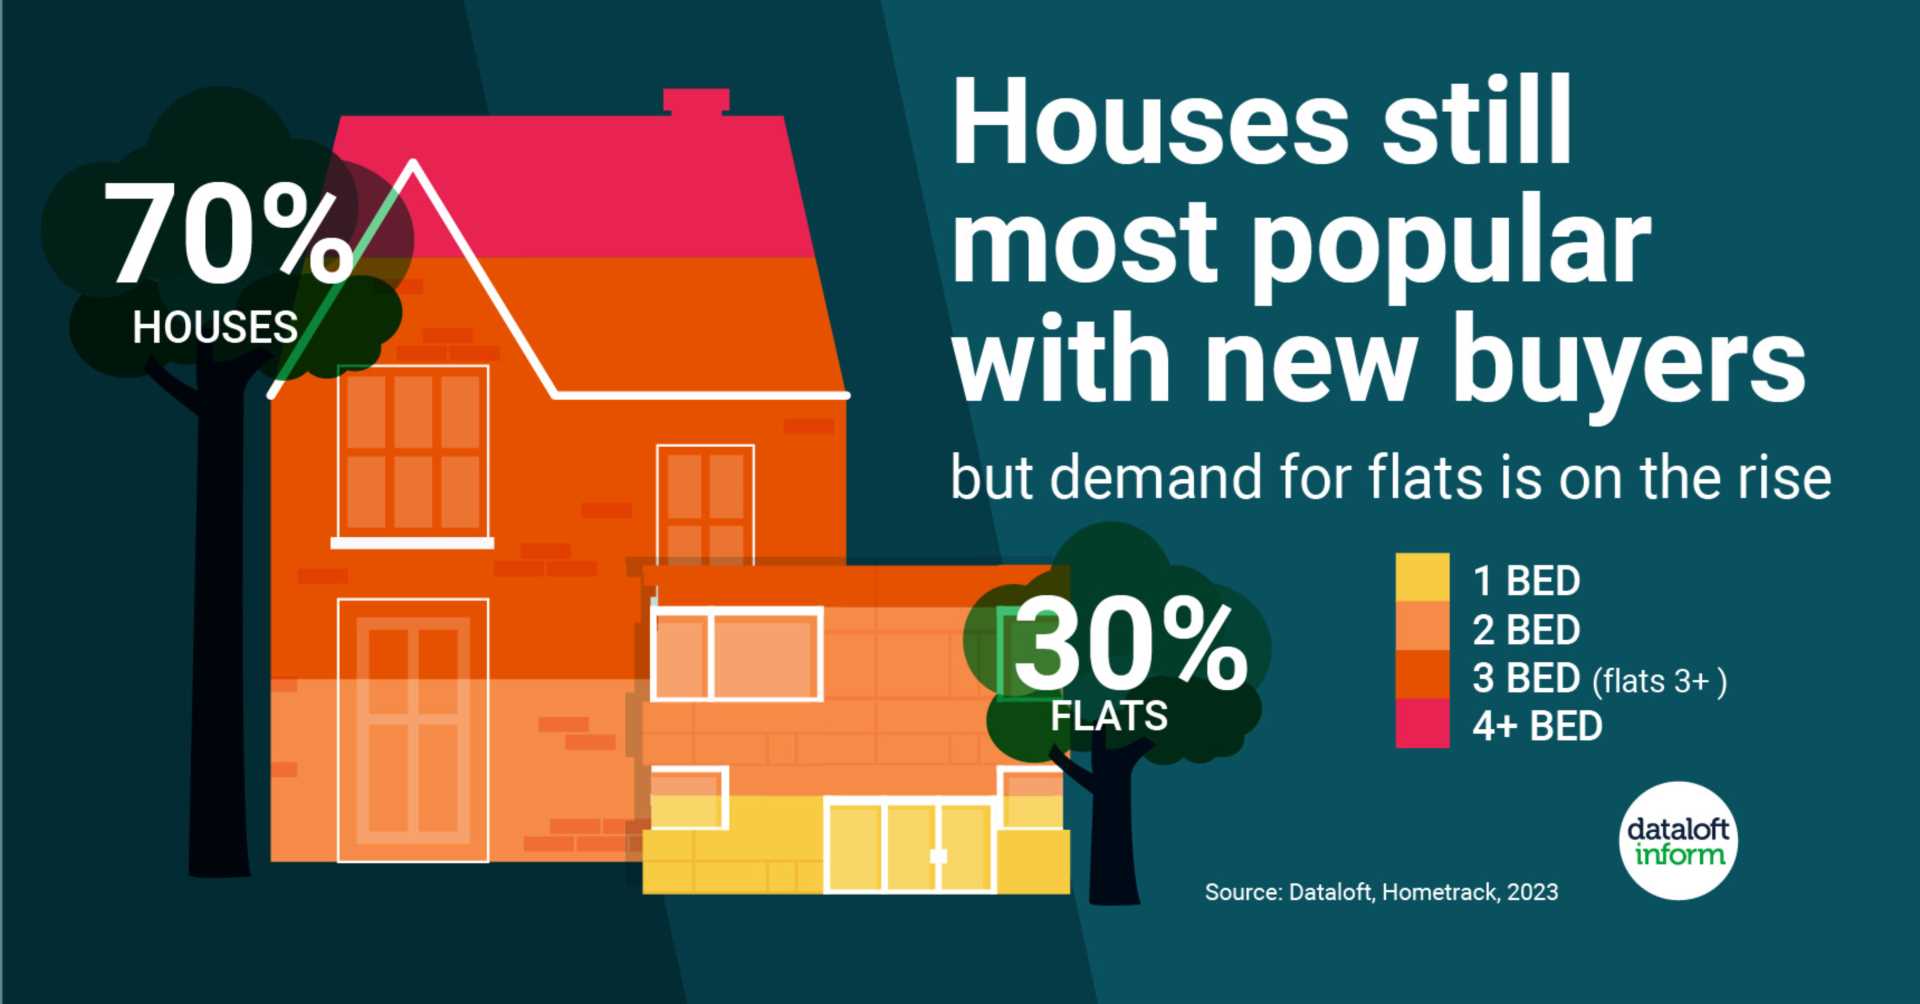 Houses still most popular with new buyers